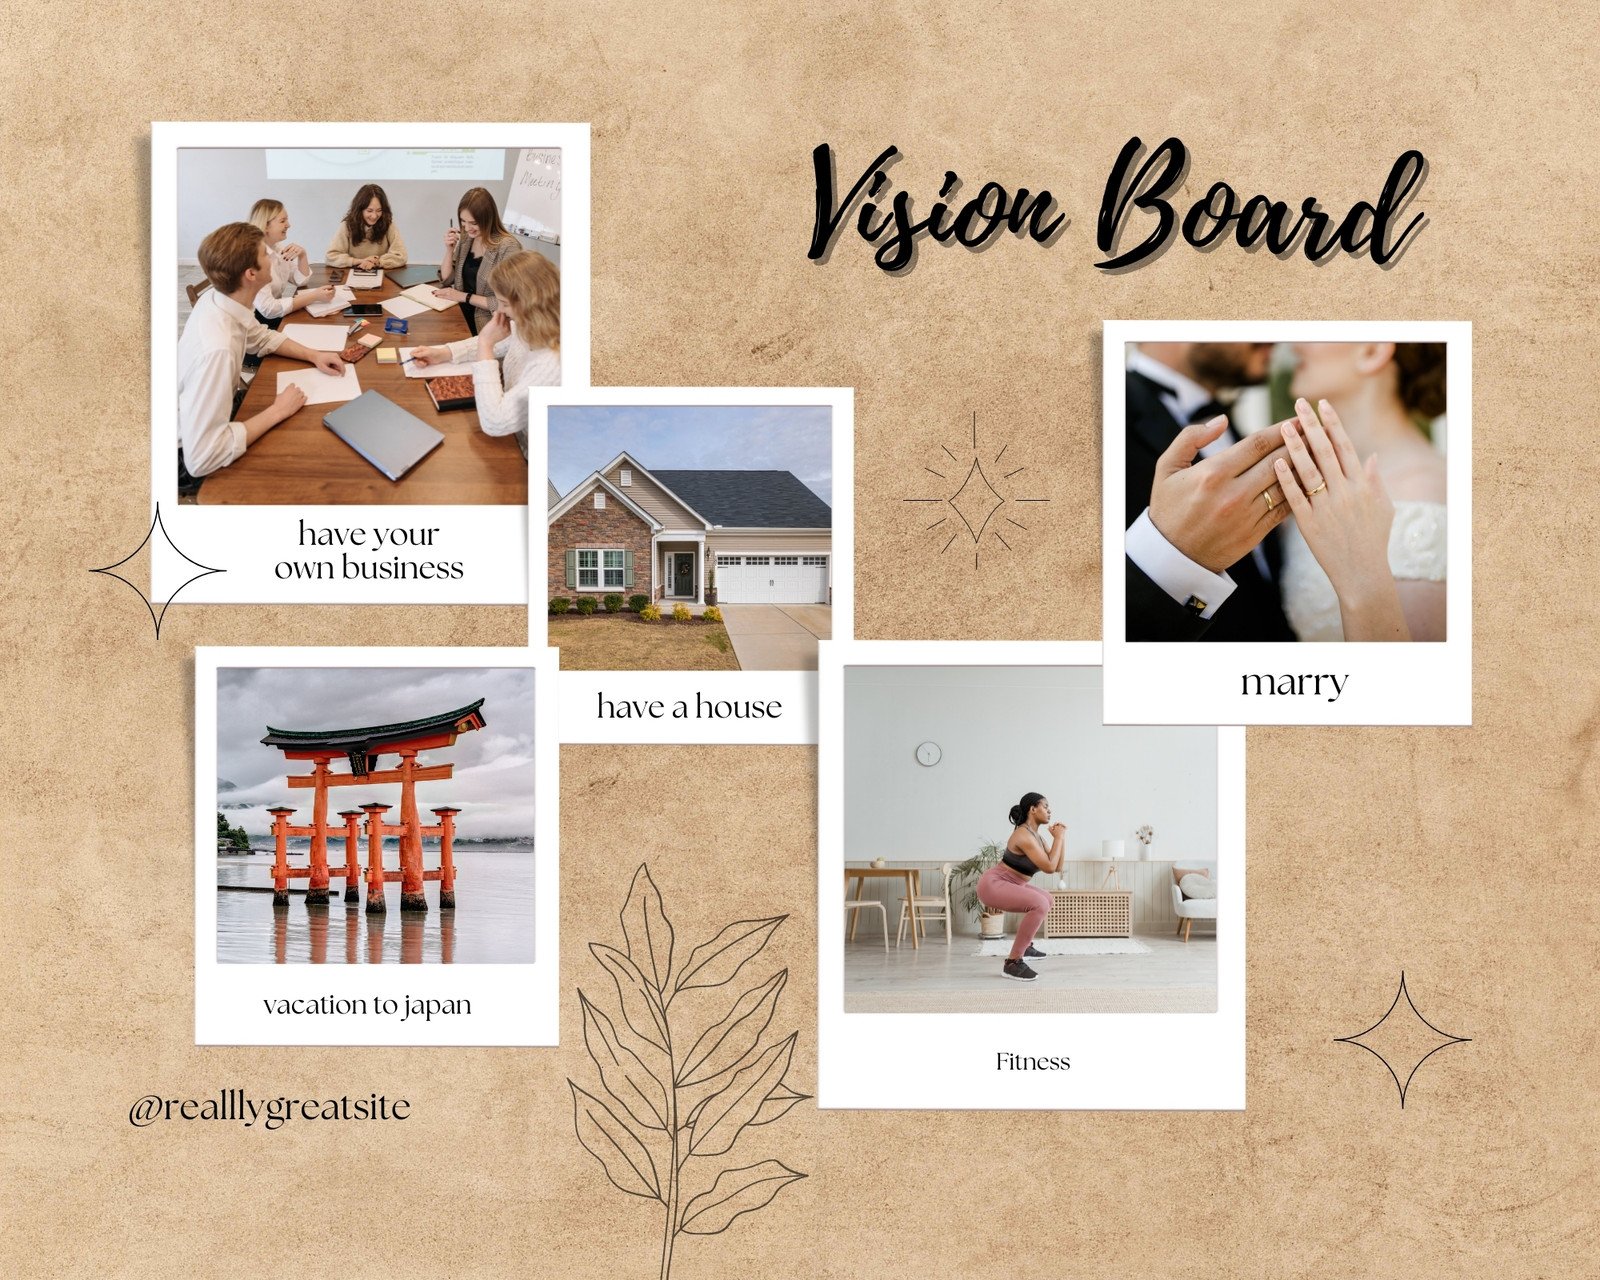 Free and customizable vision board templates